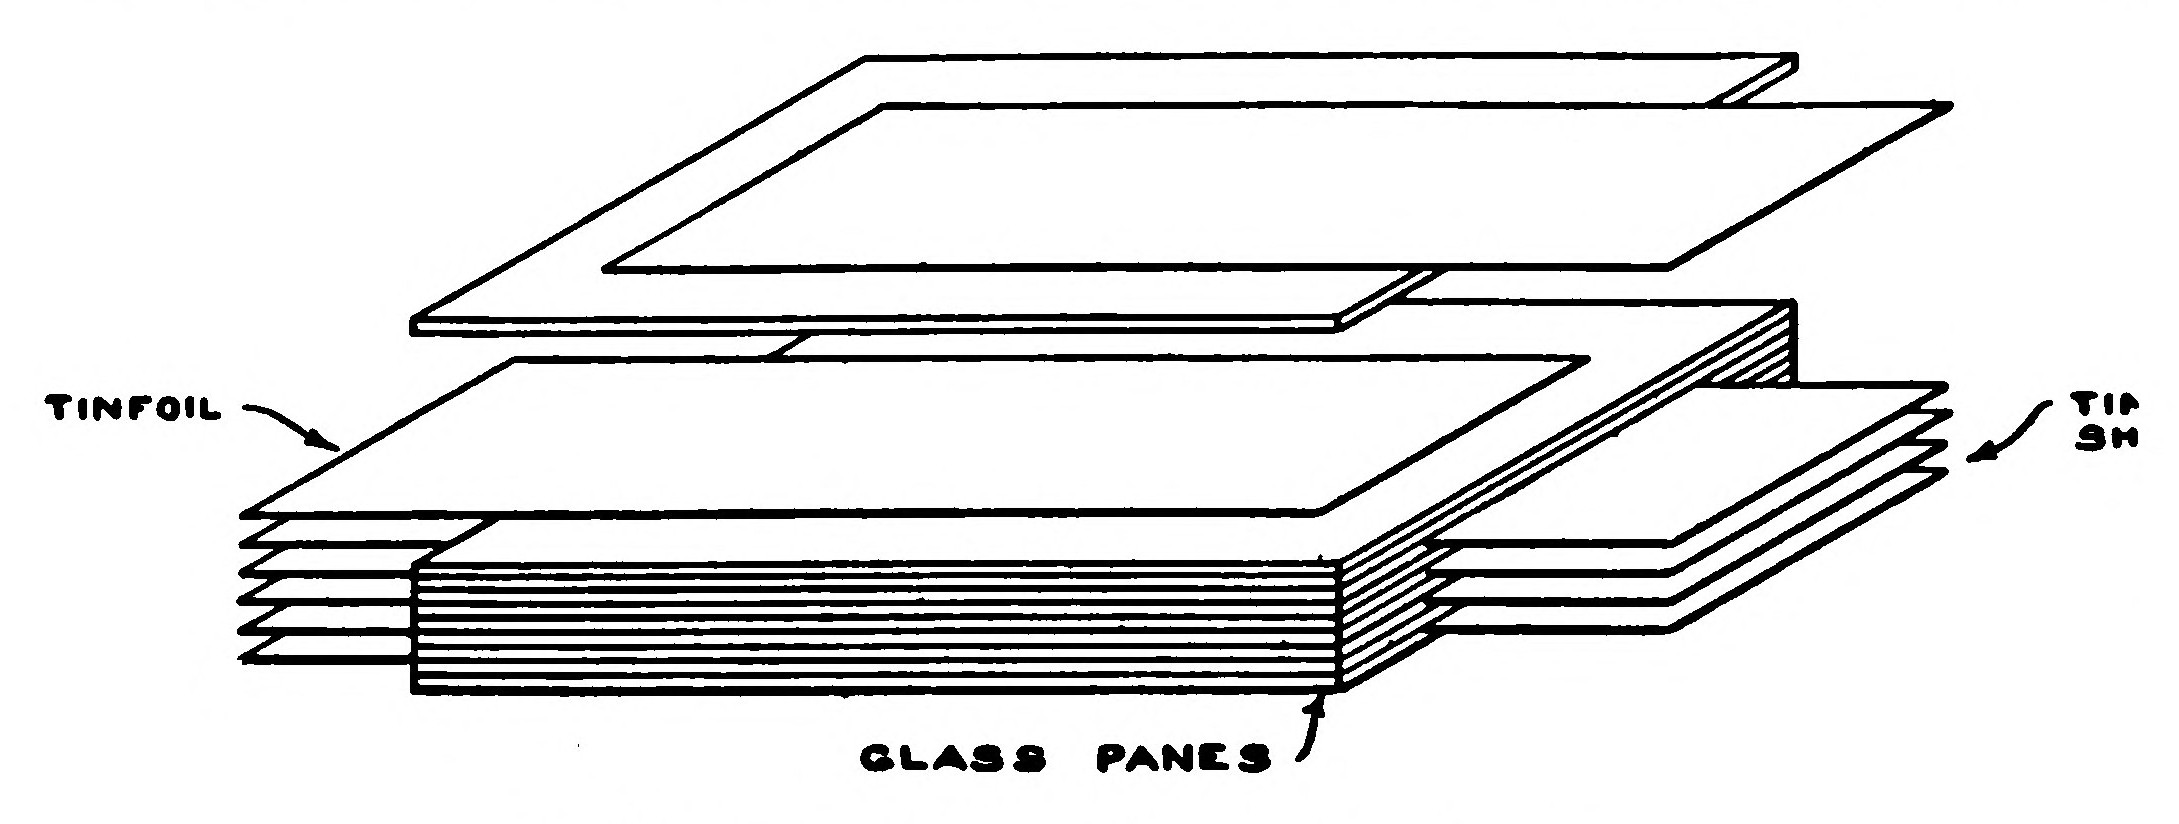 FIG. 178.—Plate Glass Condenser.